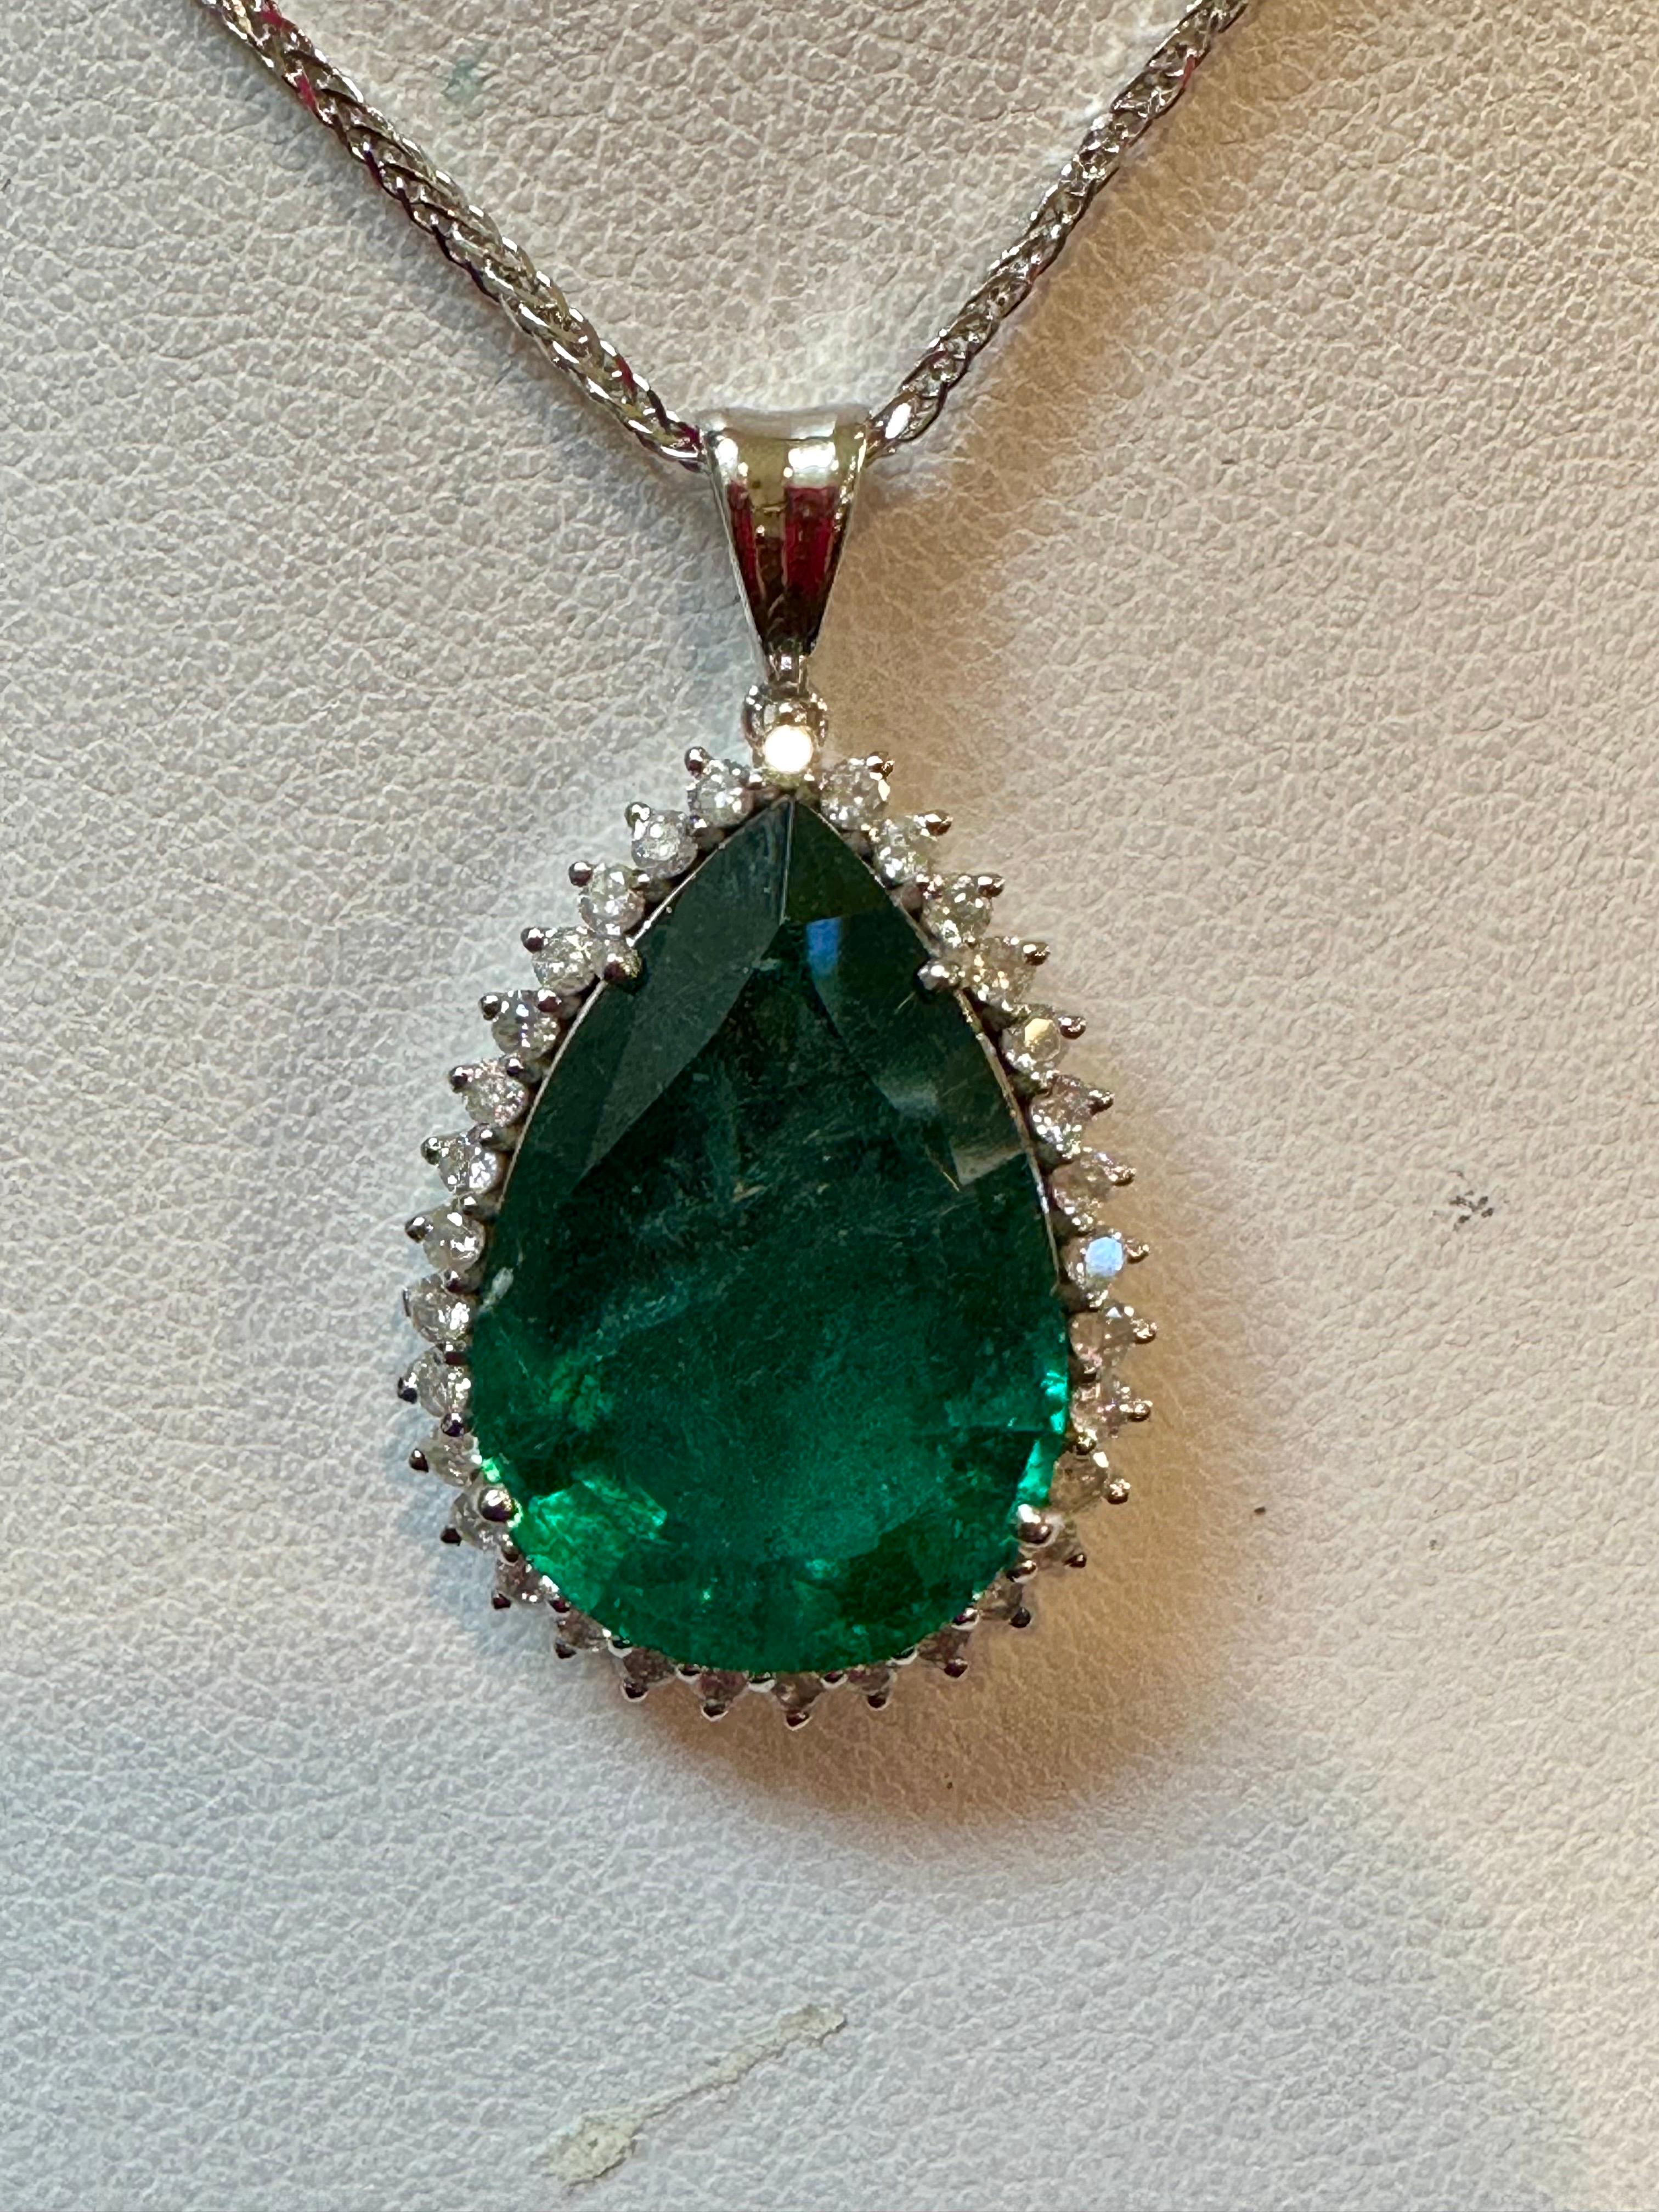 
known weight of 12.75 Ct Pear Cut Emerald & 1 Ct Diamond Halo Pendent/Necklace 14 Kt White Gold Chain 18 